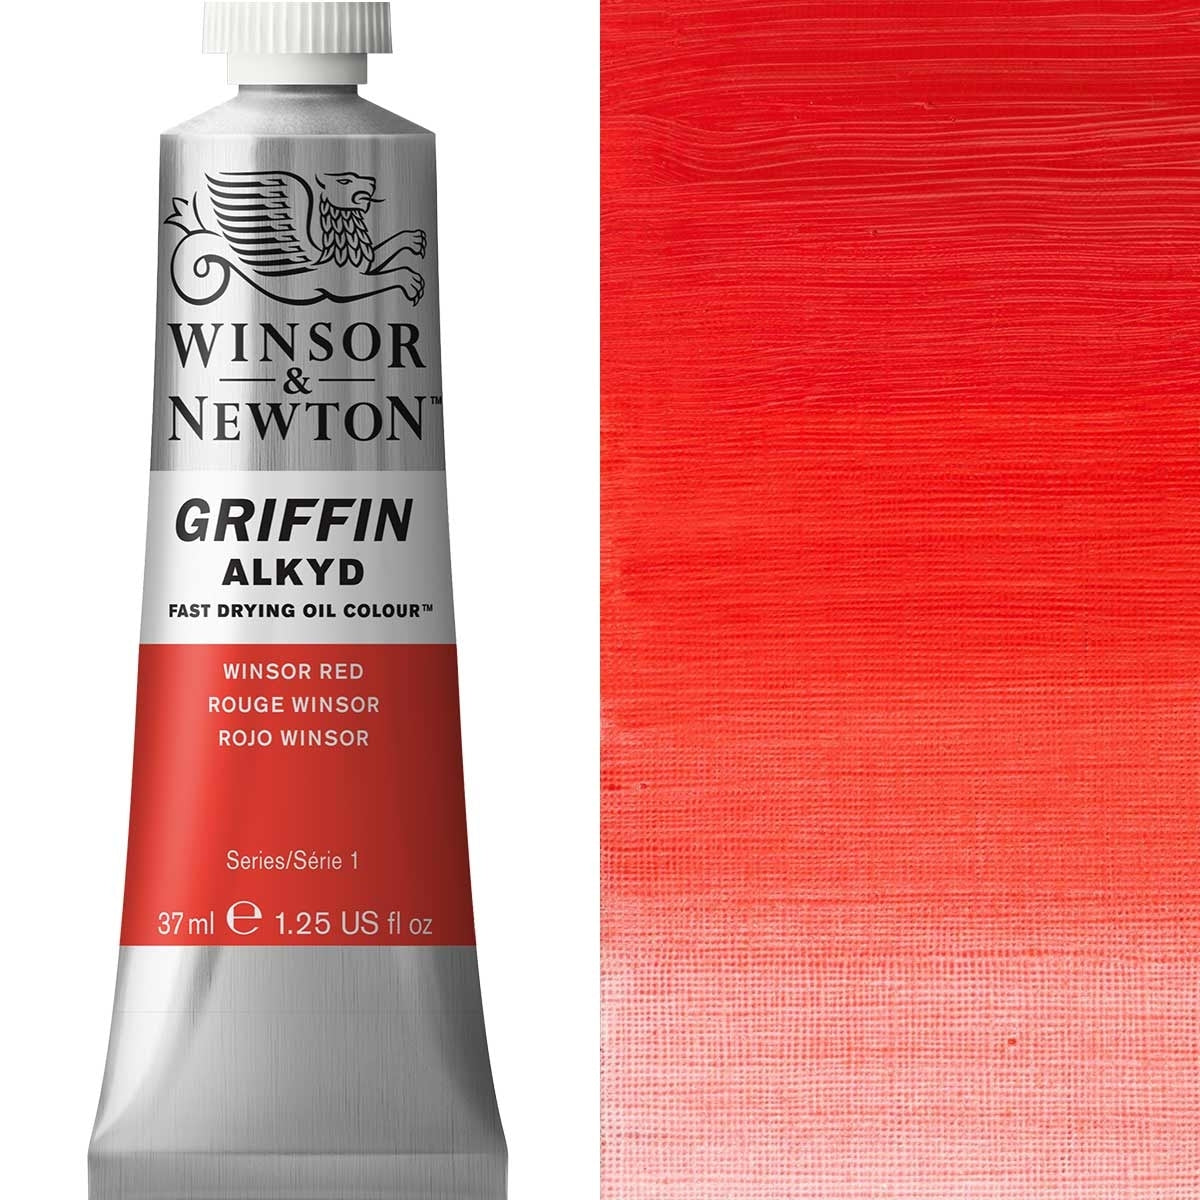 Winsor et Newton - Griffin Alkyd Oil Color - 37ml - Winsor Red